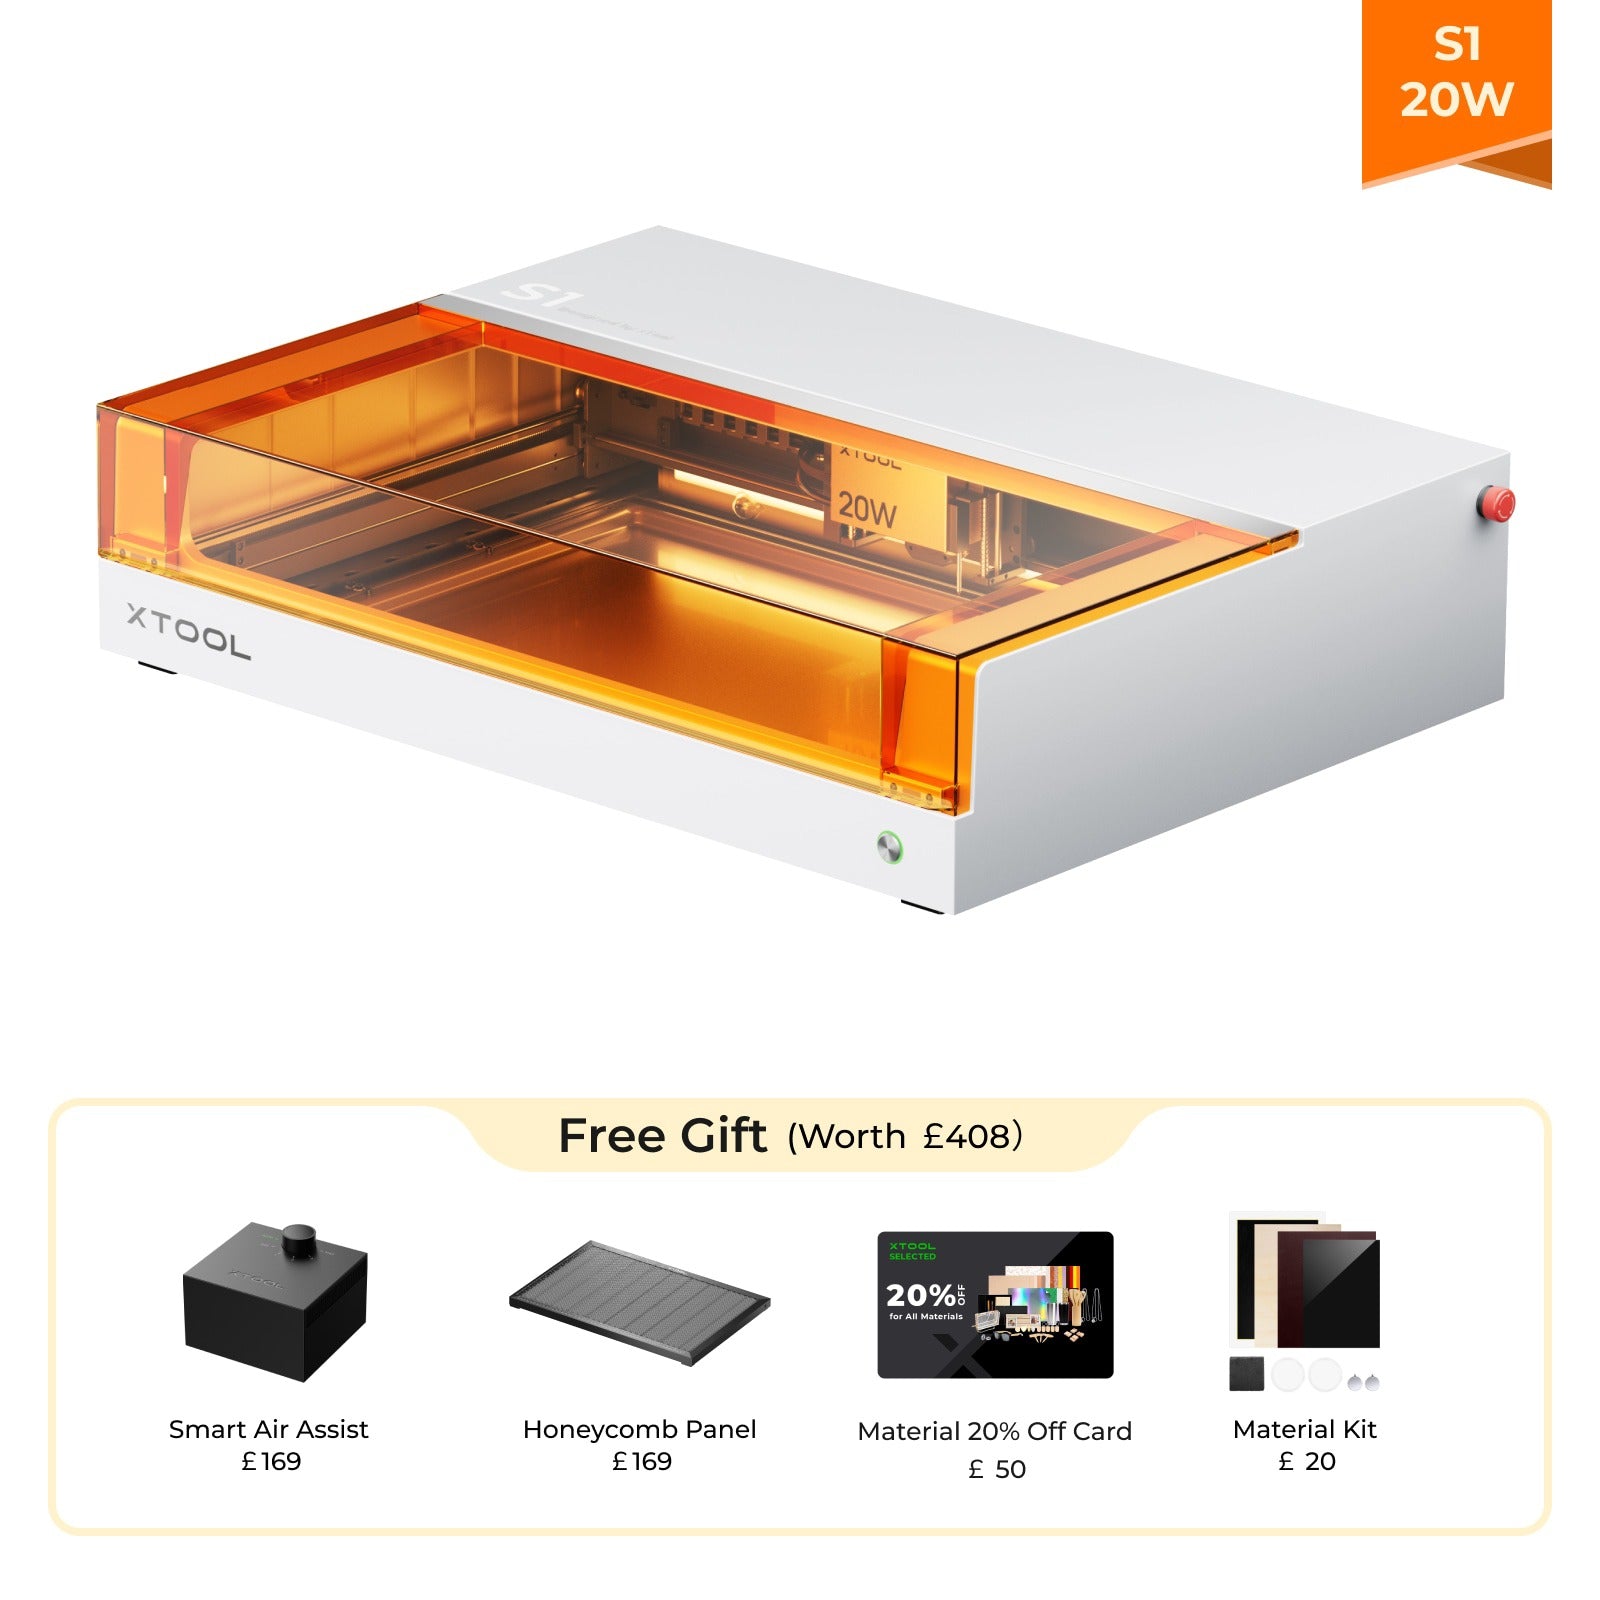 xTool S1 20W Enclosed Diode Laser Cutter